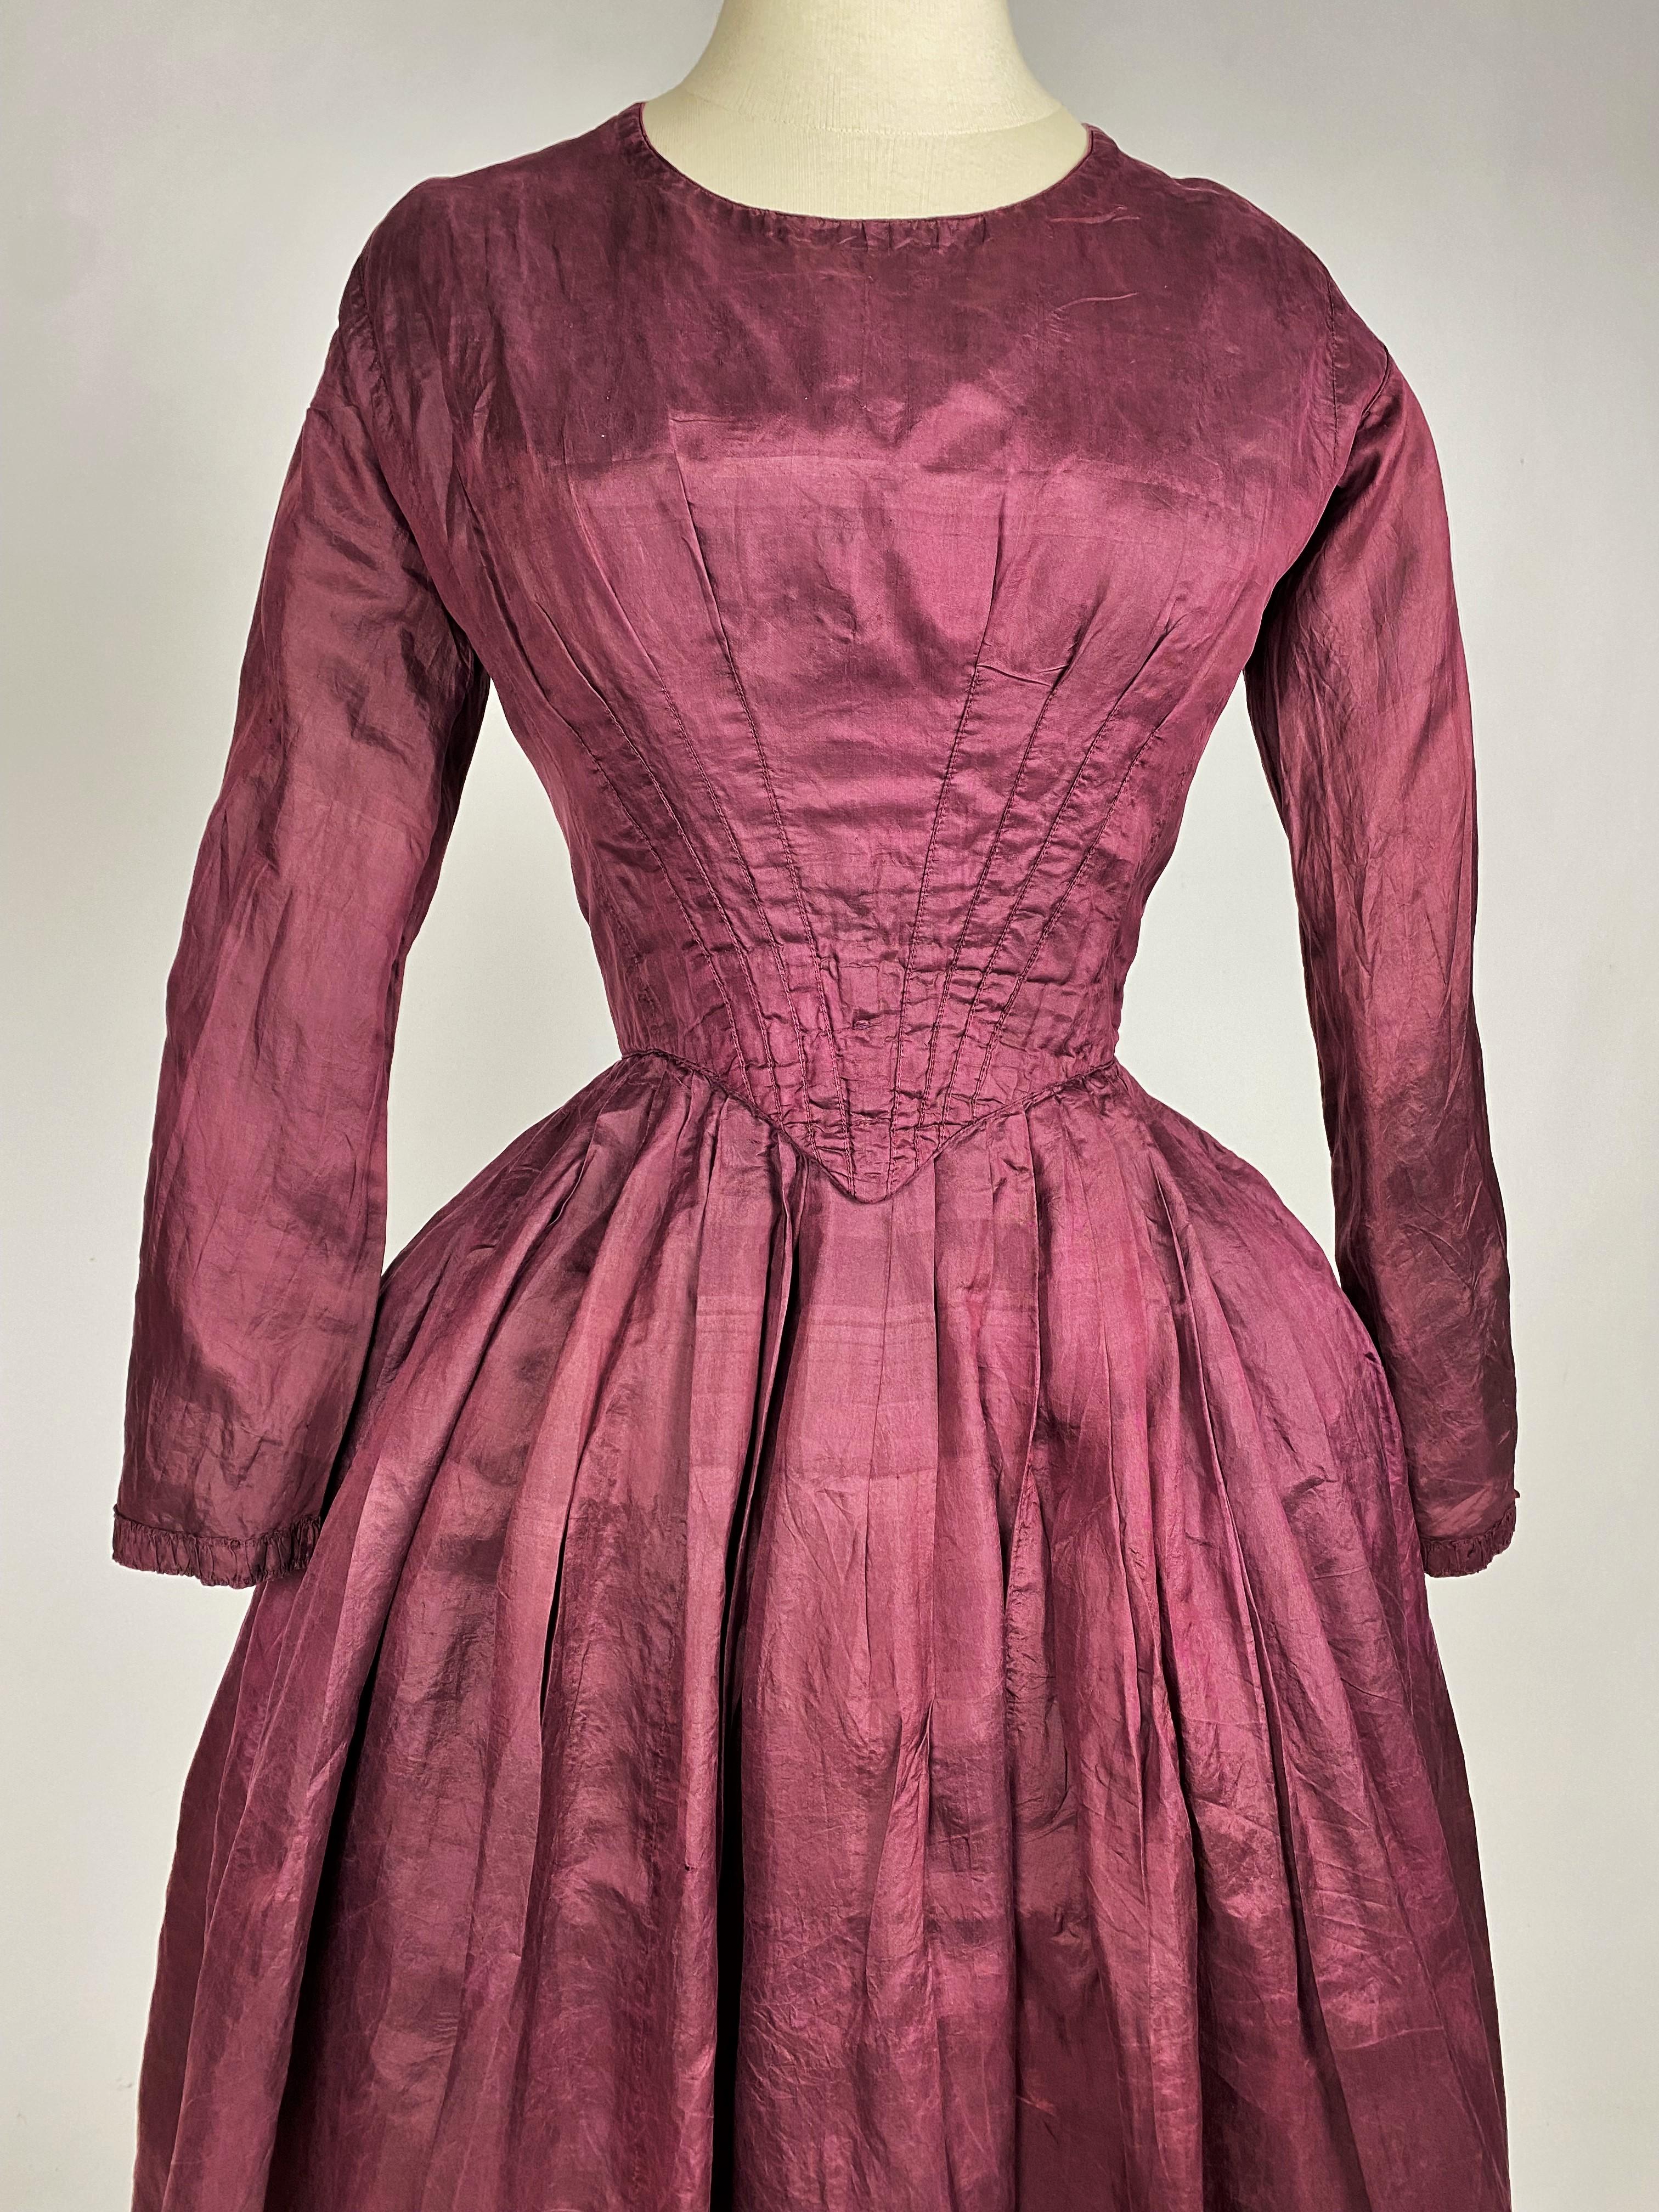 Circa 1845-1850
France
Day dress in wine coloured silk pongee taffeta, aubergine dating from the late Romantic period. This dress has been washed and dyed bordeau probably for a second life. Elegant bourgeois dress with a bodice fitted at the neck